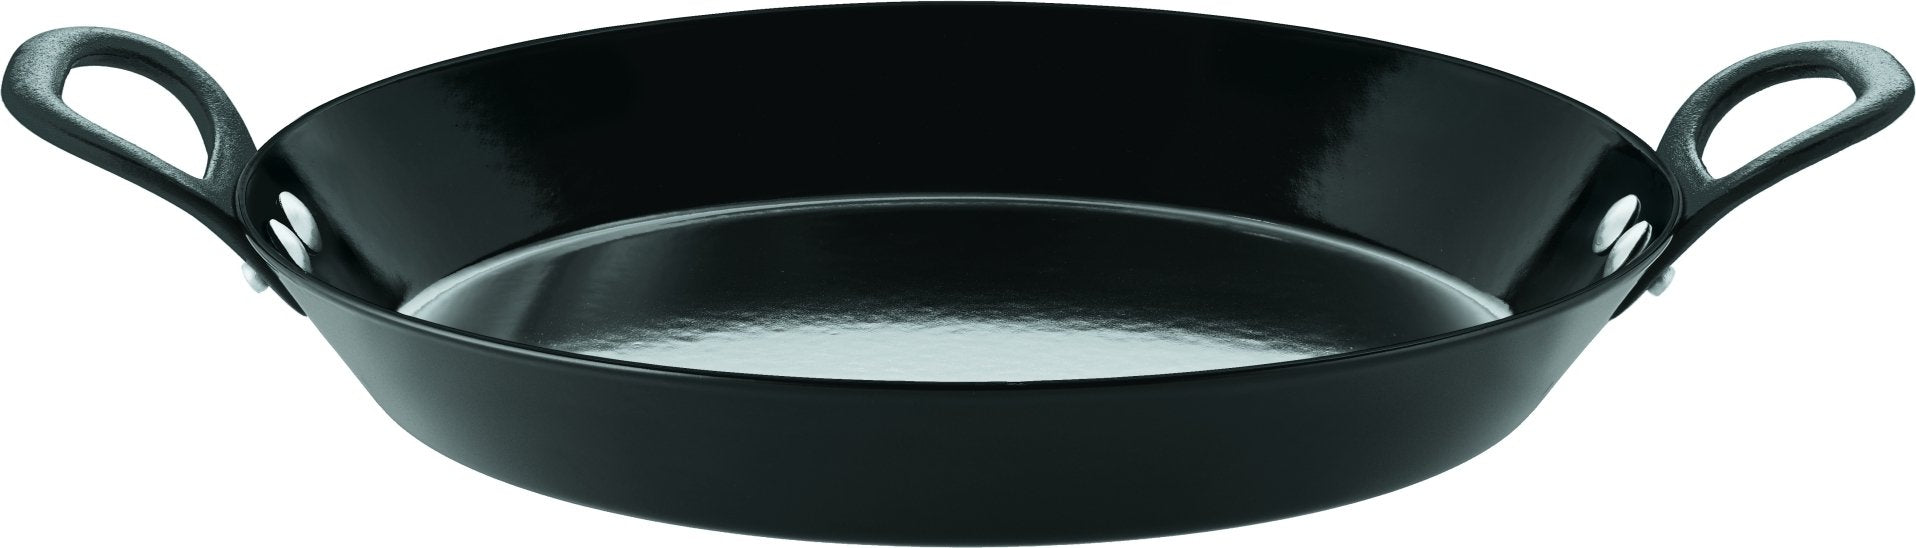 Rosle - 11" Enamelled Iron Serving Pan with Cast Iron Handles (28 cm) - 26442